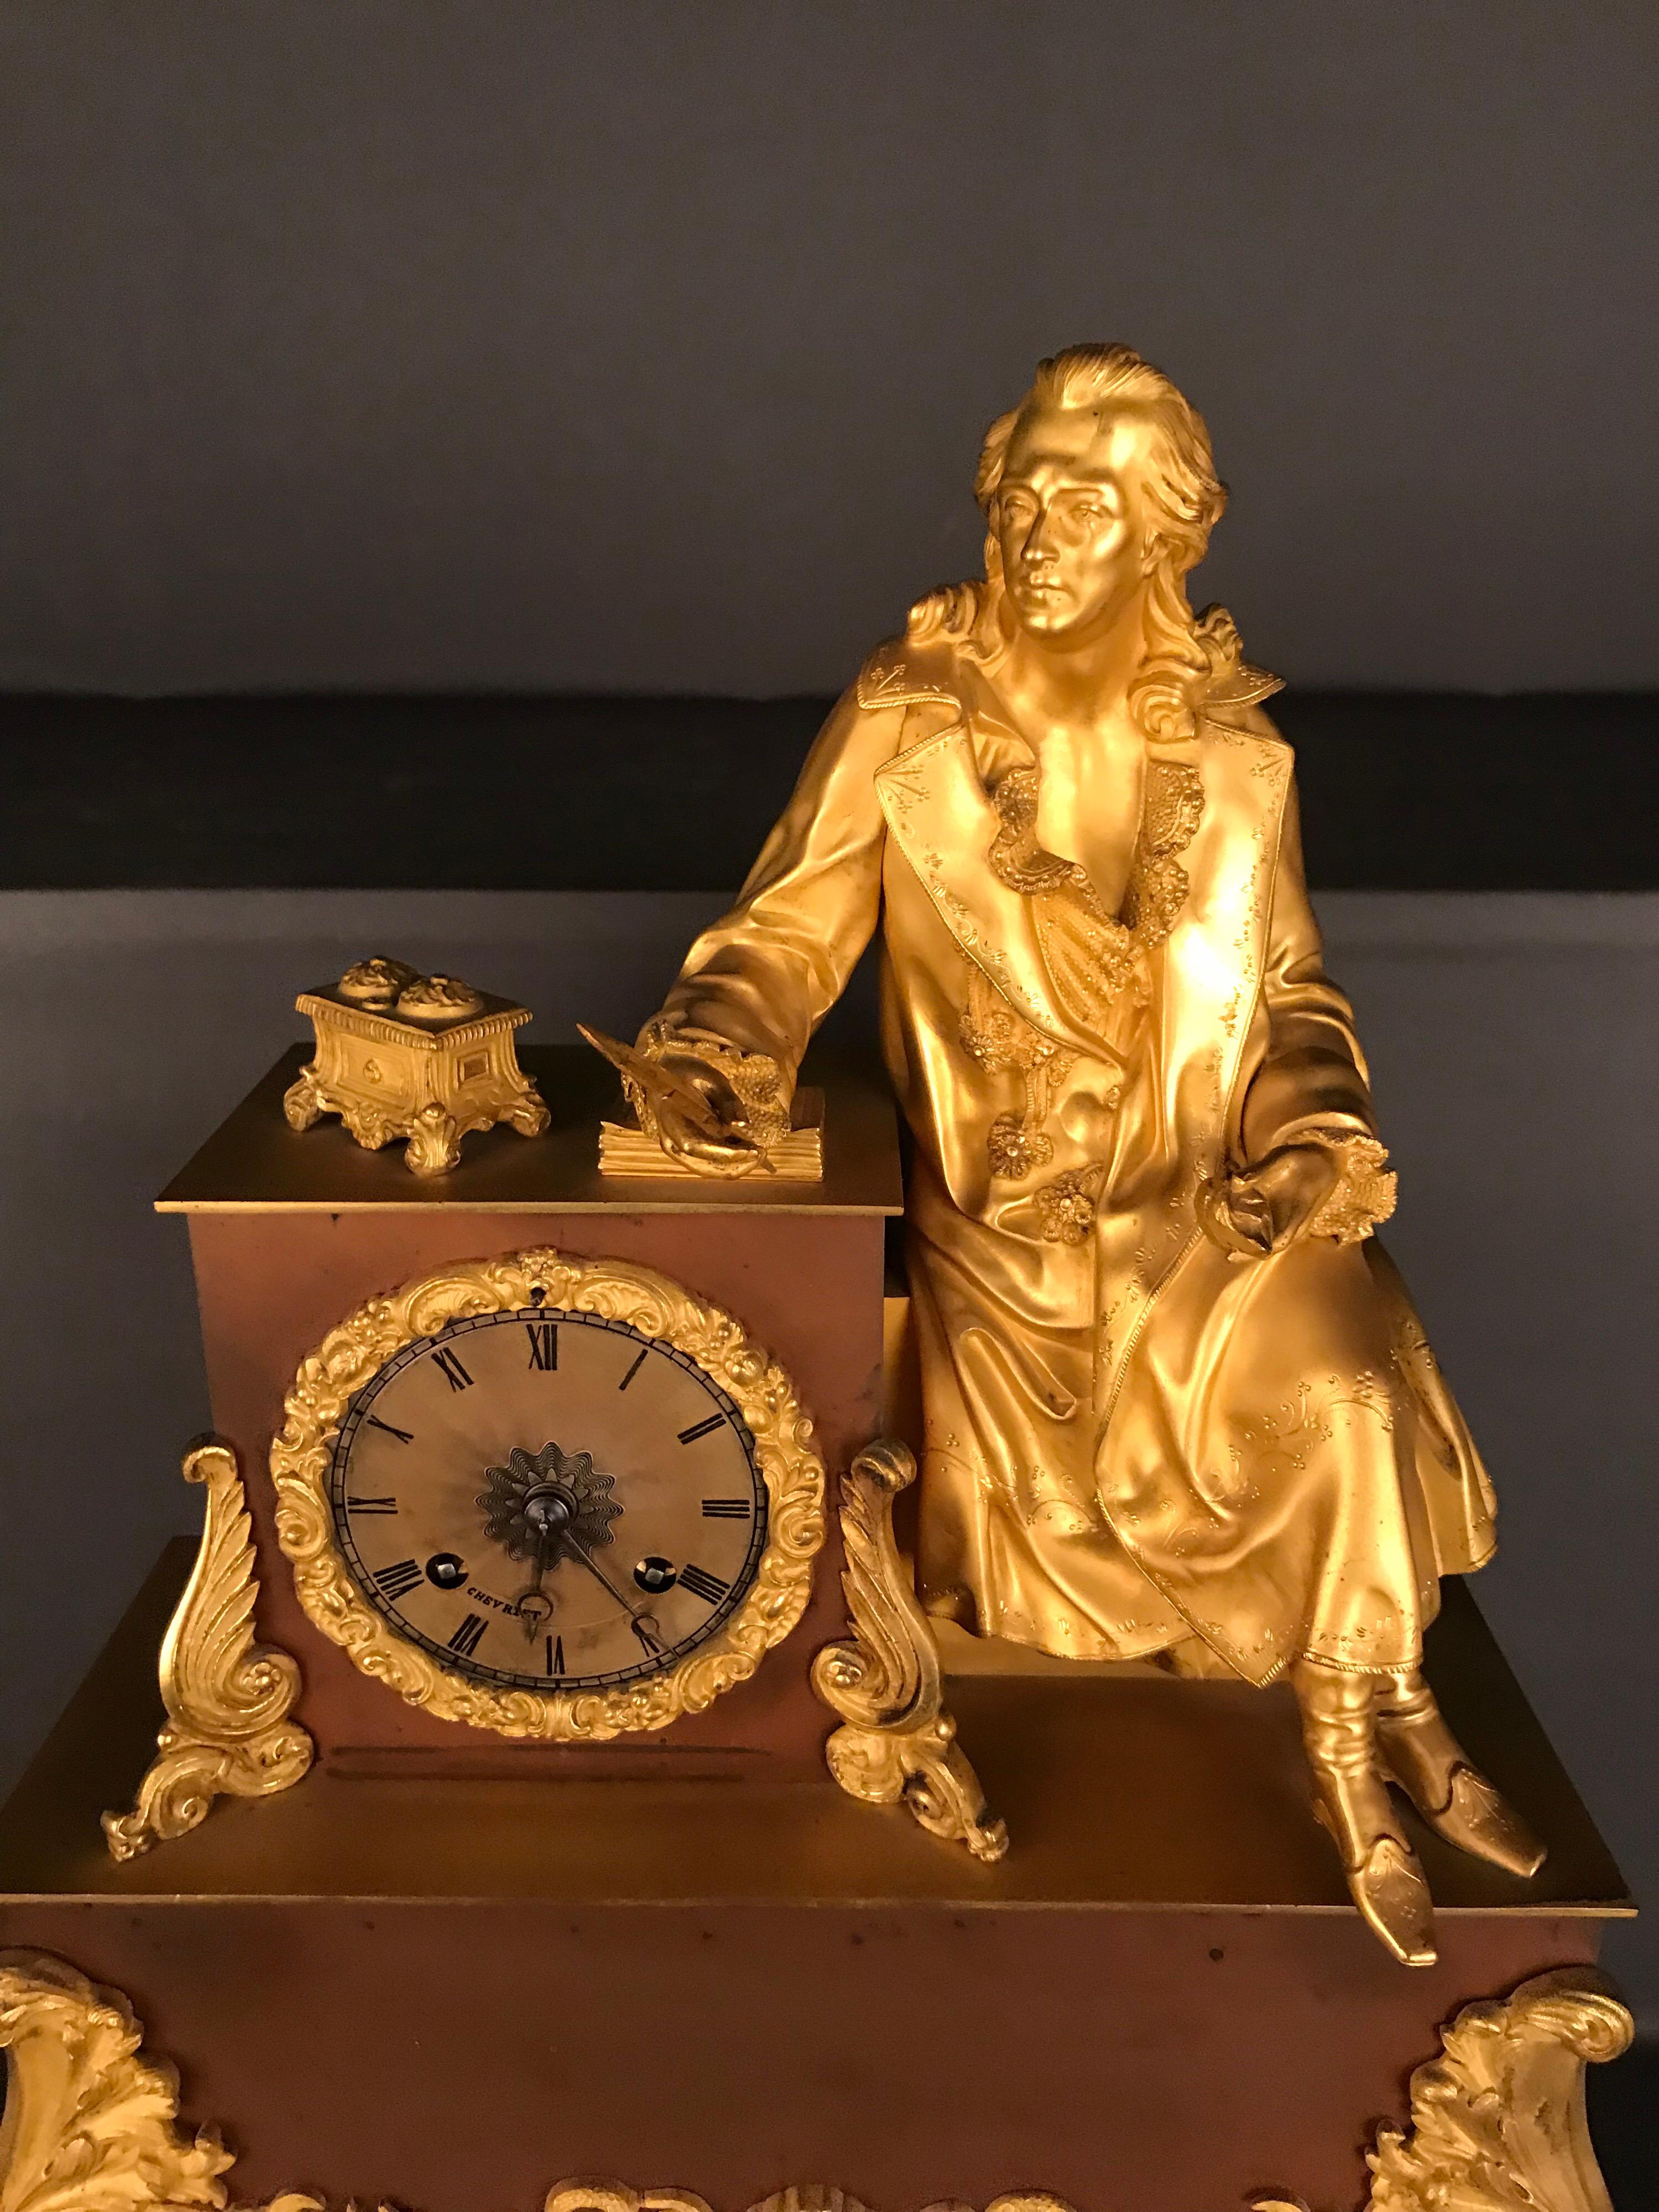 Very fine pendula, circa 1870
Fire-gilded brass clock
Clock is from cherviet
Napoleon 3
The movement must be checked for accuracy
Seated poet with a pen in hand.